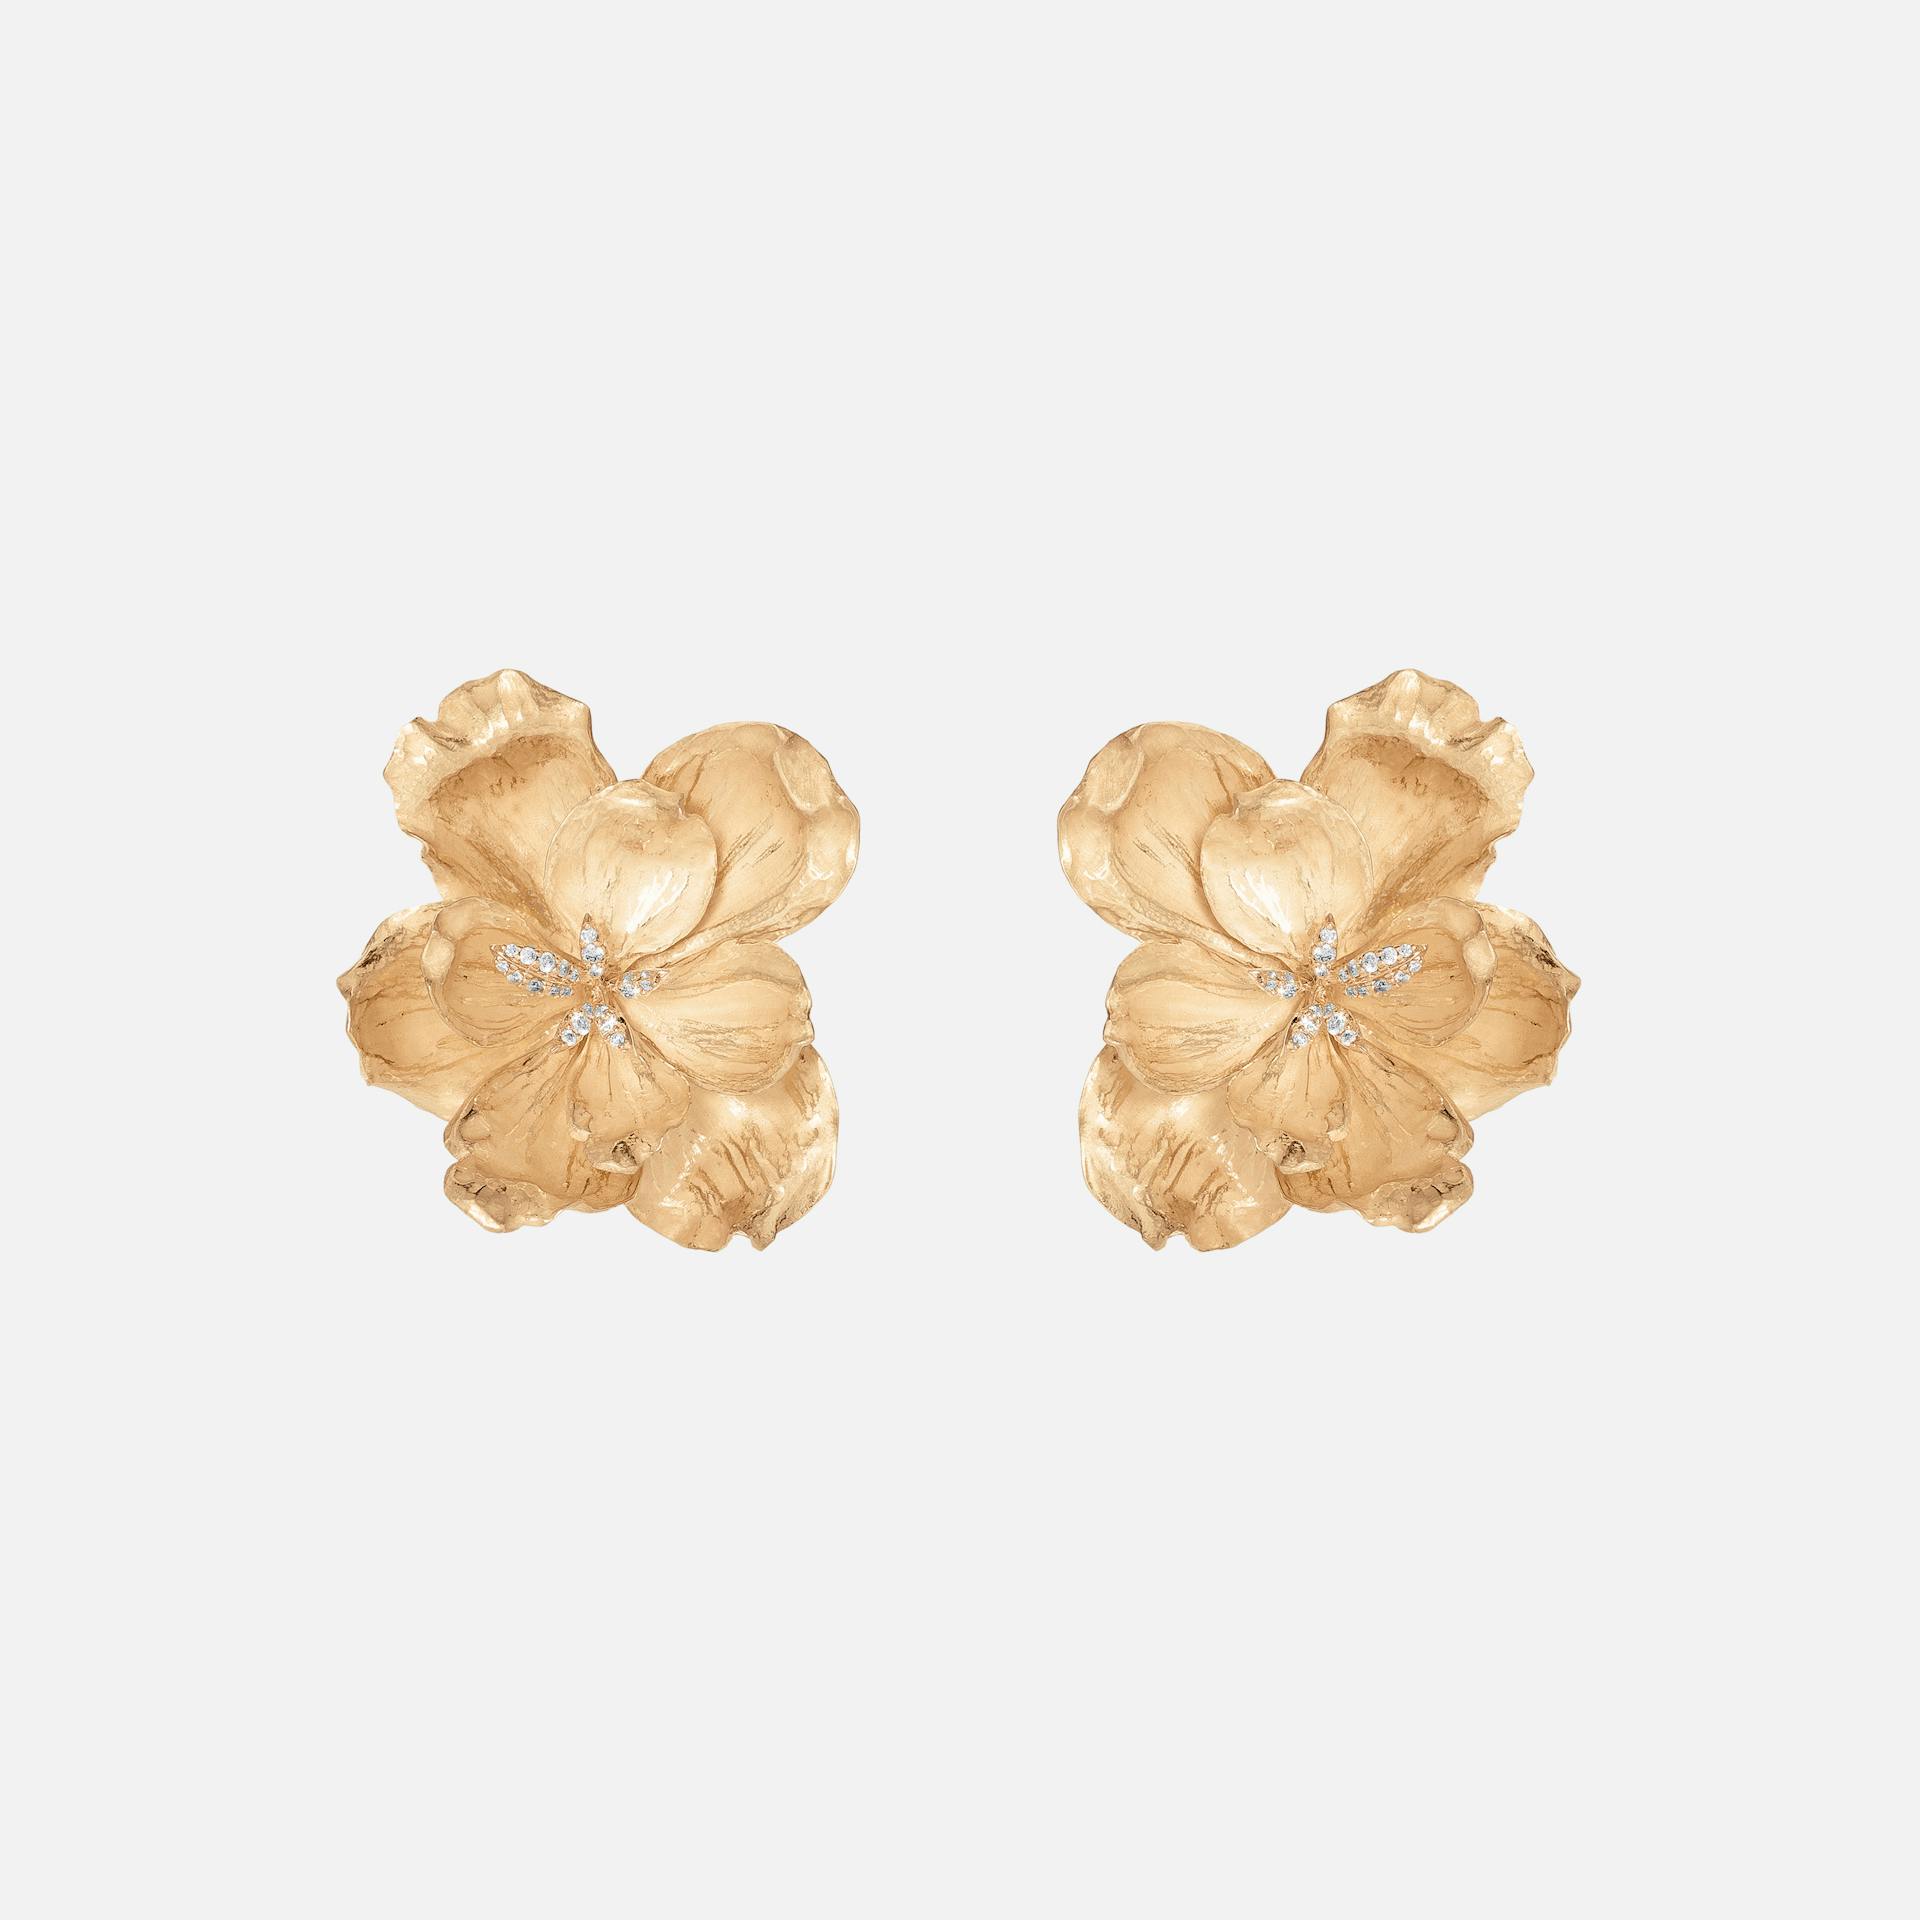 Wild Rose earclips 18k gold with diamonds undefined